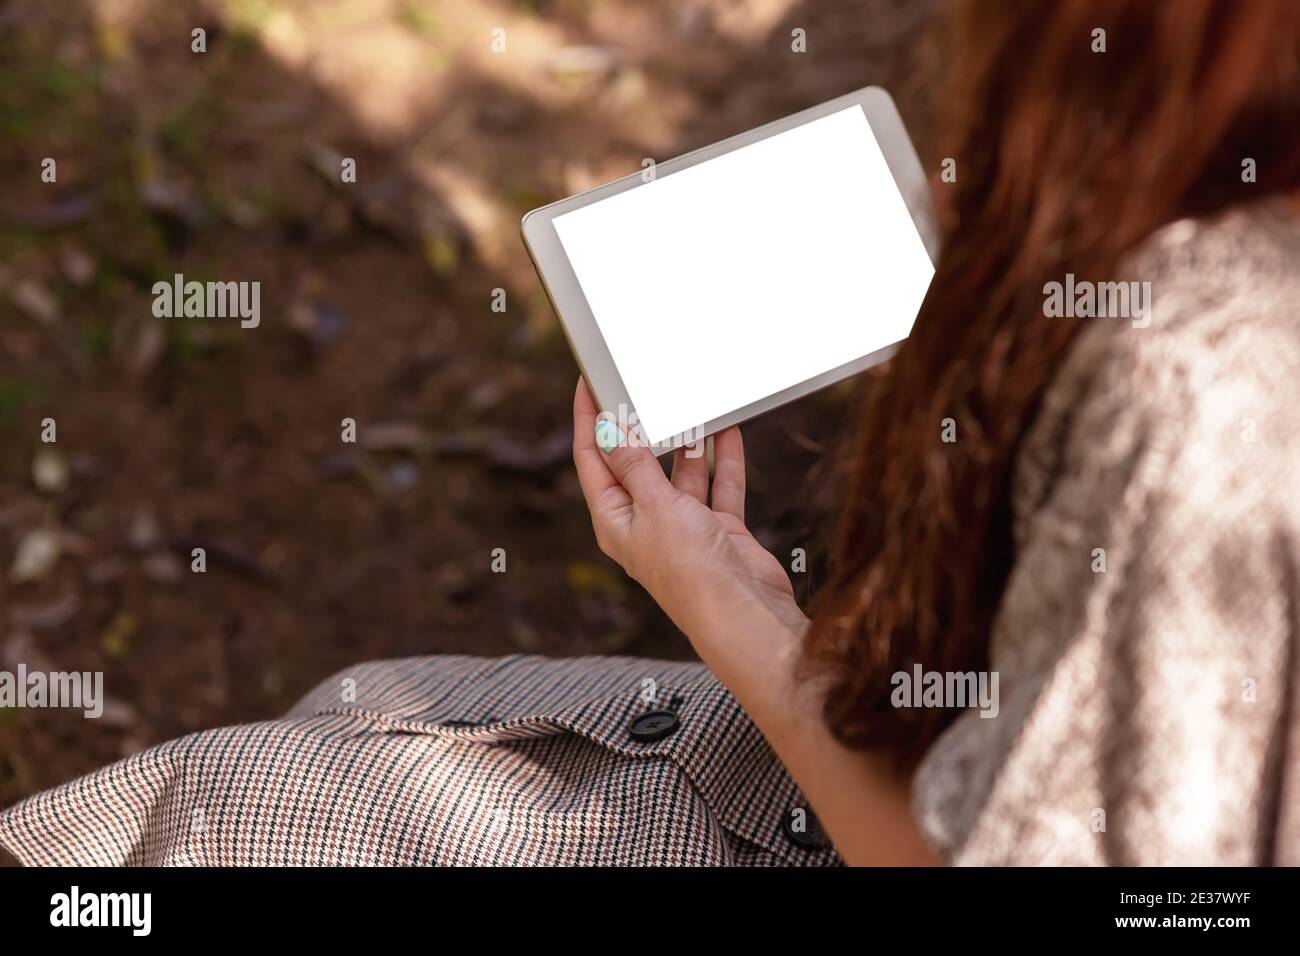 A woman with long brown hair, sitting in a knitted jumper in the park, holds a digital tablet. Stock Photo